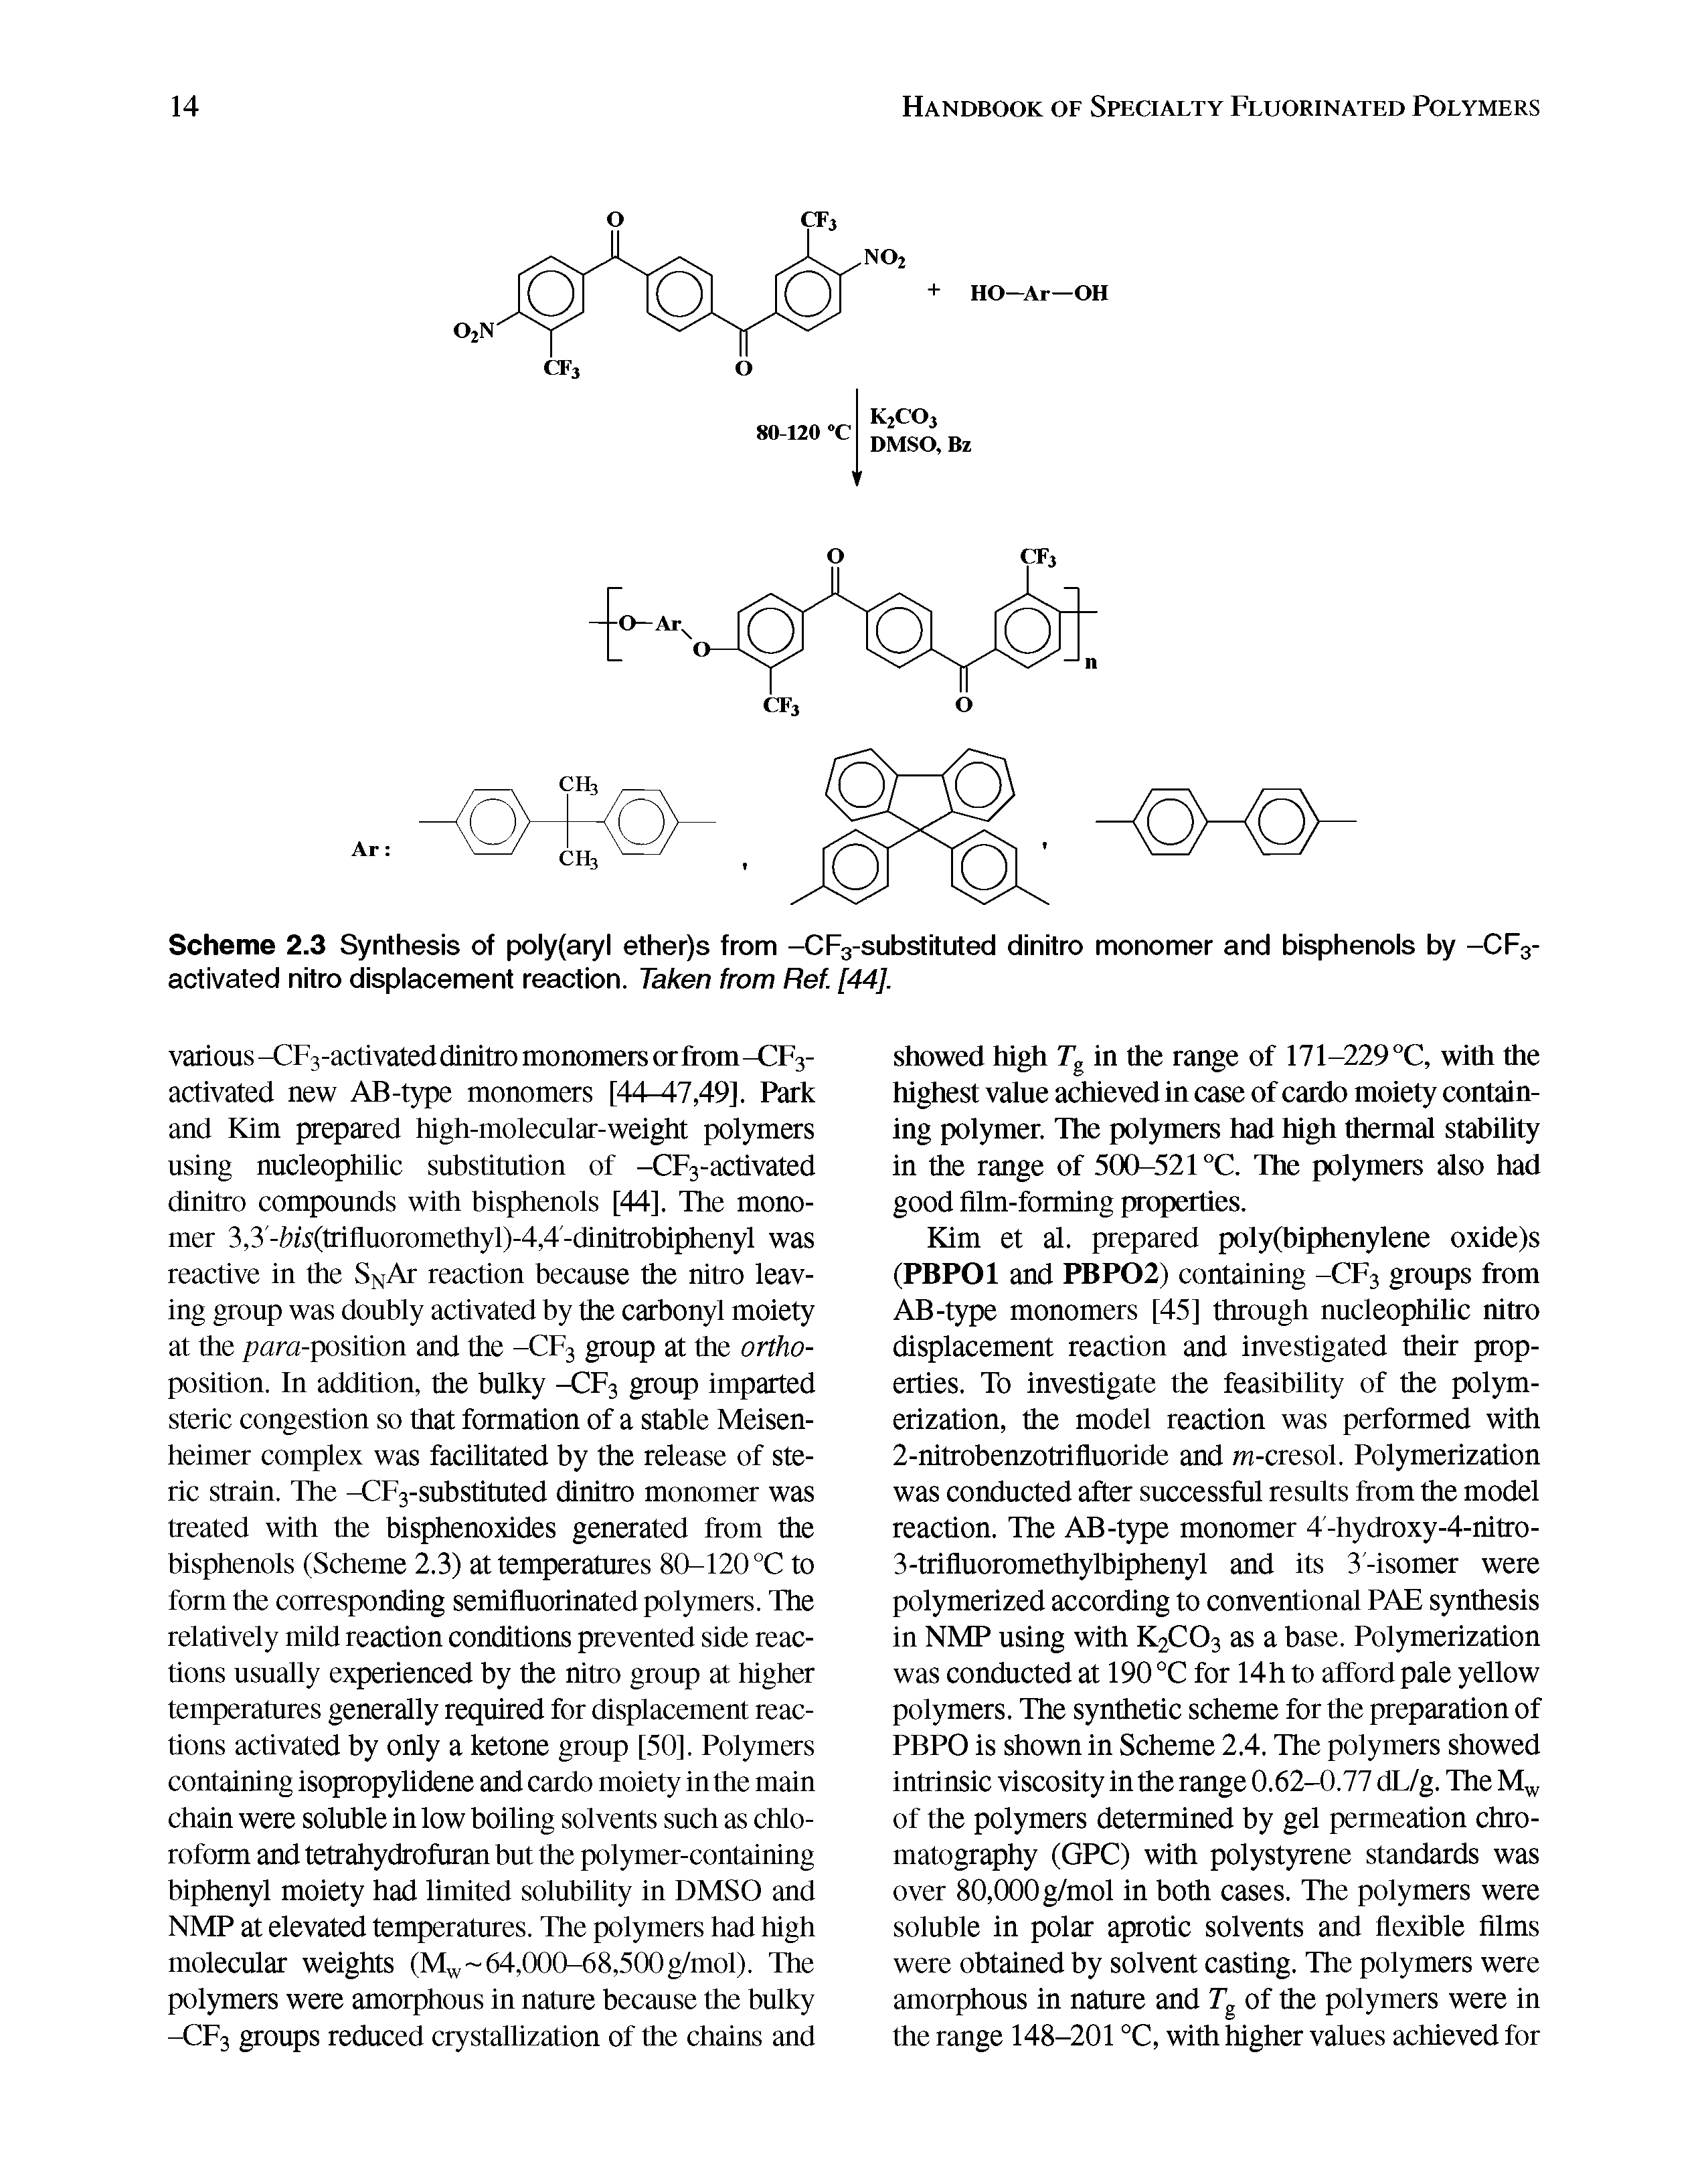 Scheme 2.3 Synthesis of poly(aryl ether)s from -CFg-subslituted dinitro monomer and bisphenols by -CF3-activated nitro displacement reaction. Taken from Ref. [44].